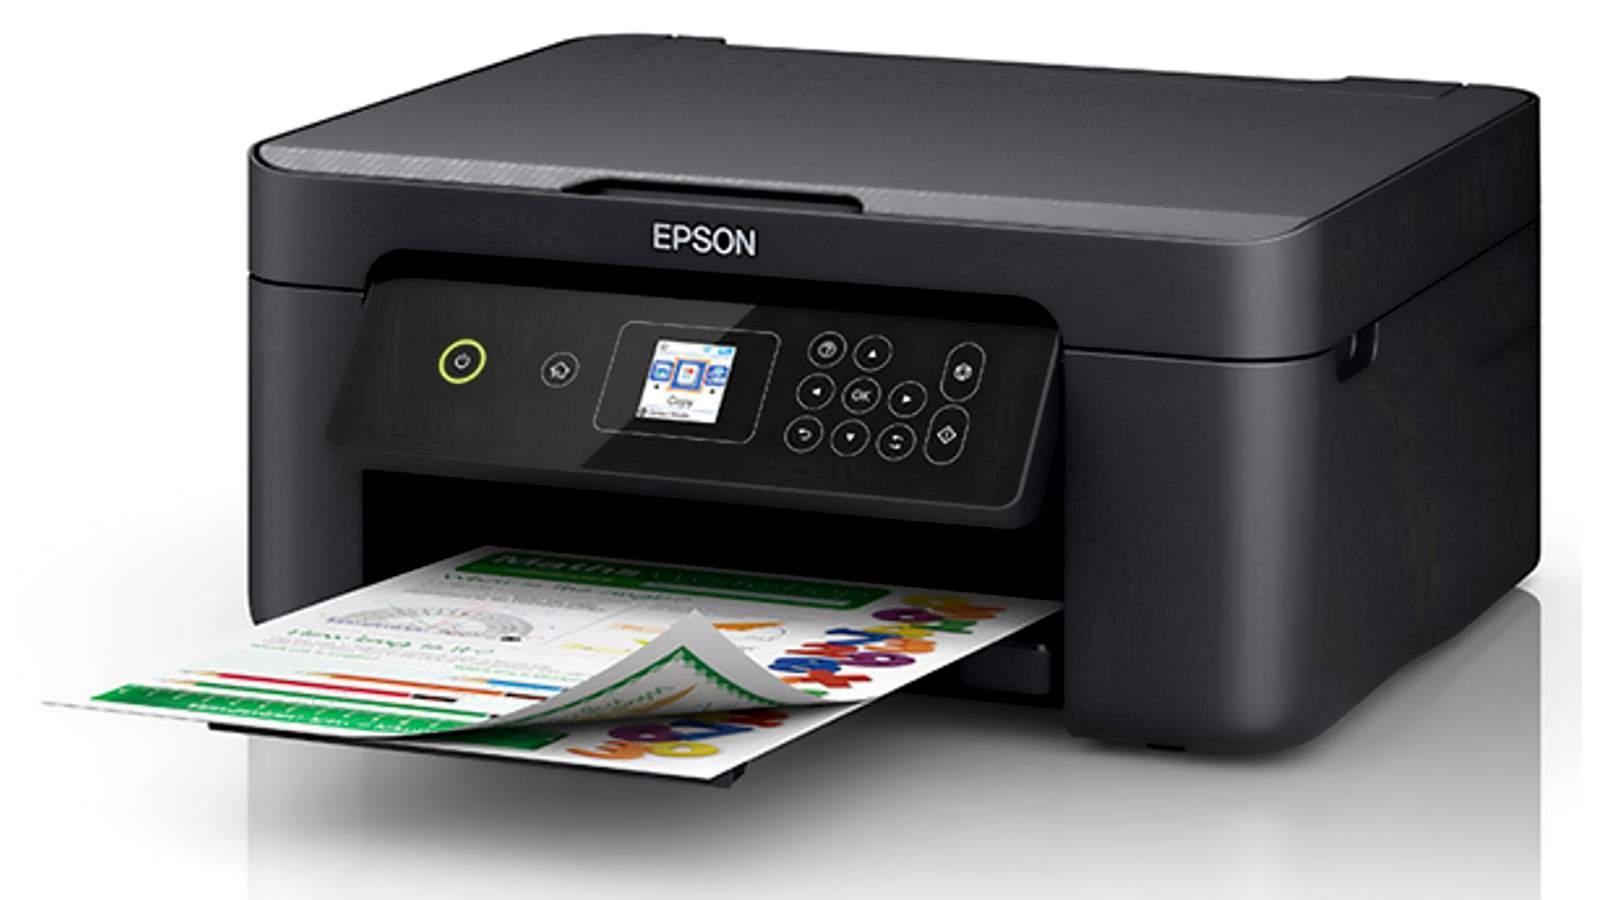 epson xp 320 install software